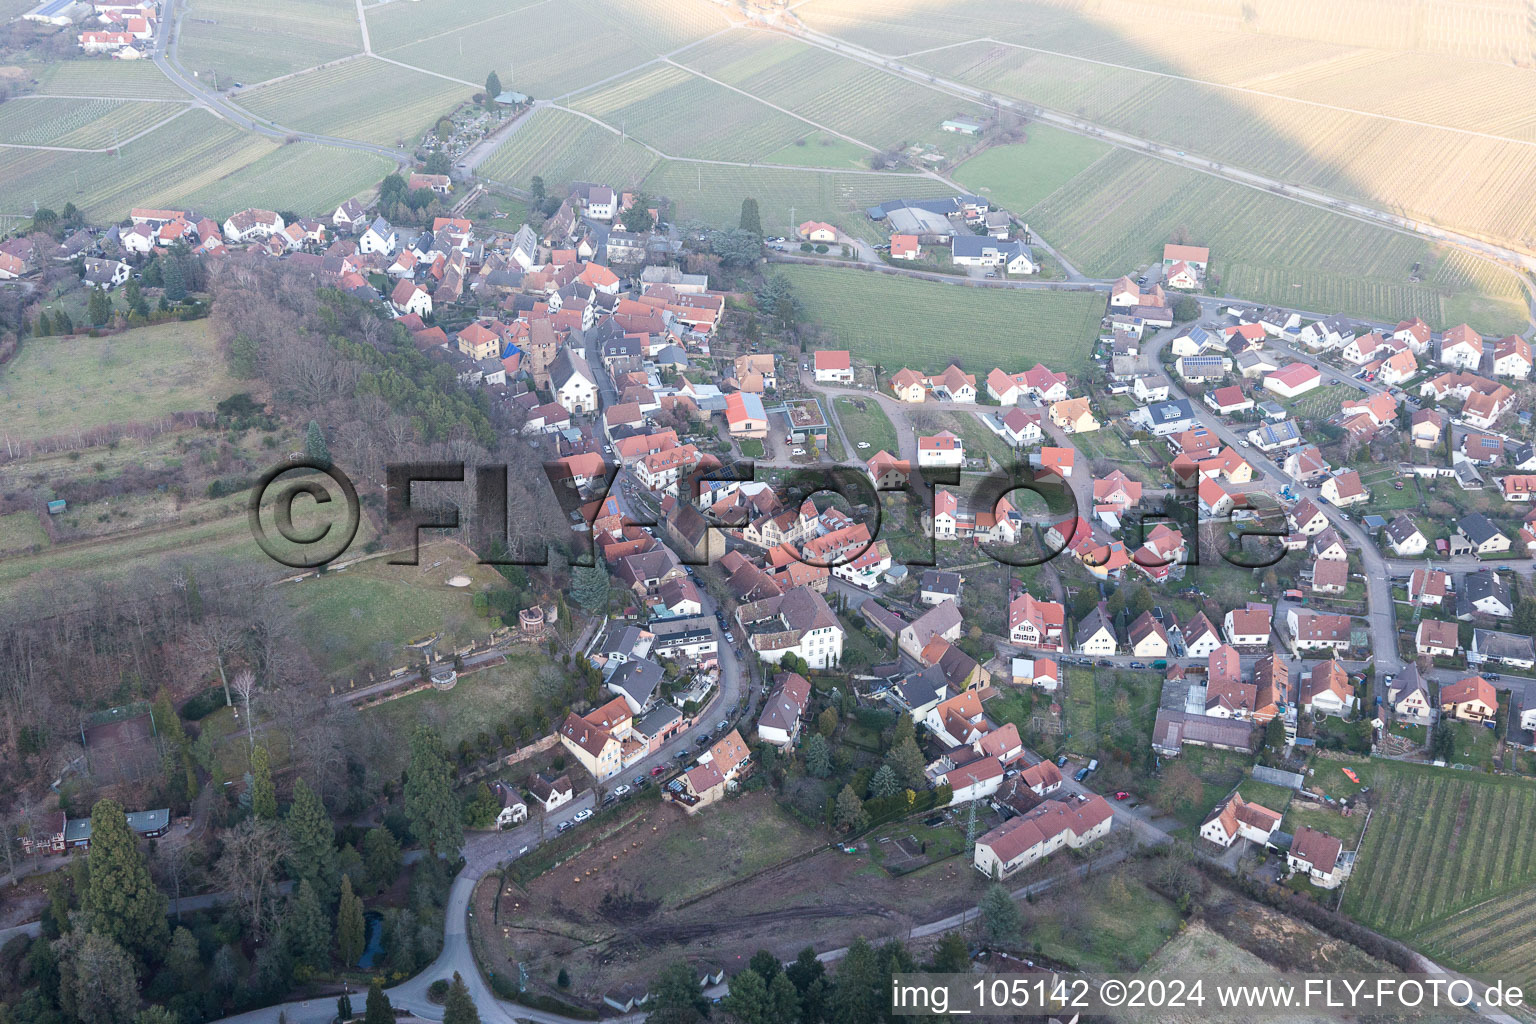 Gleisweiler in the state Rhineland-Palatinate, Germany seen from above